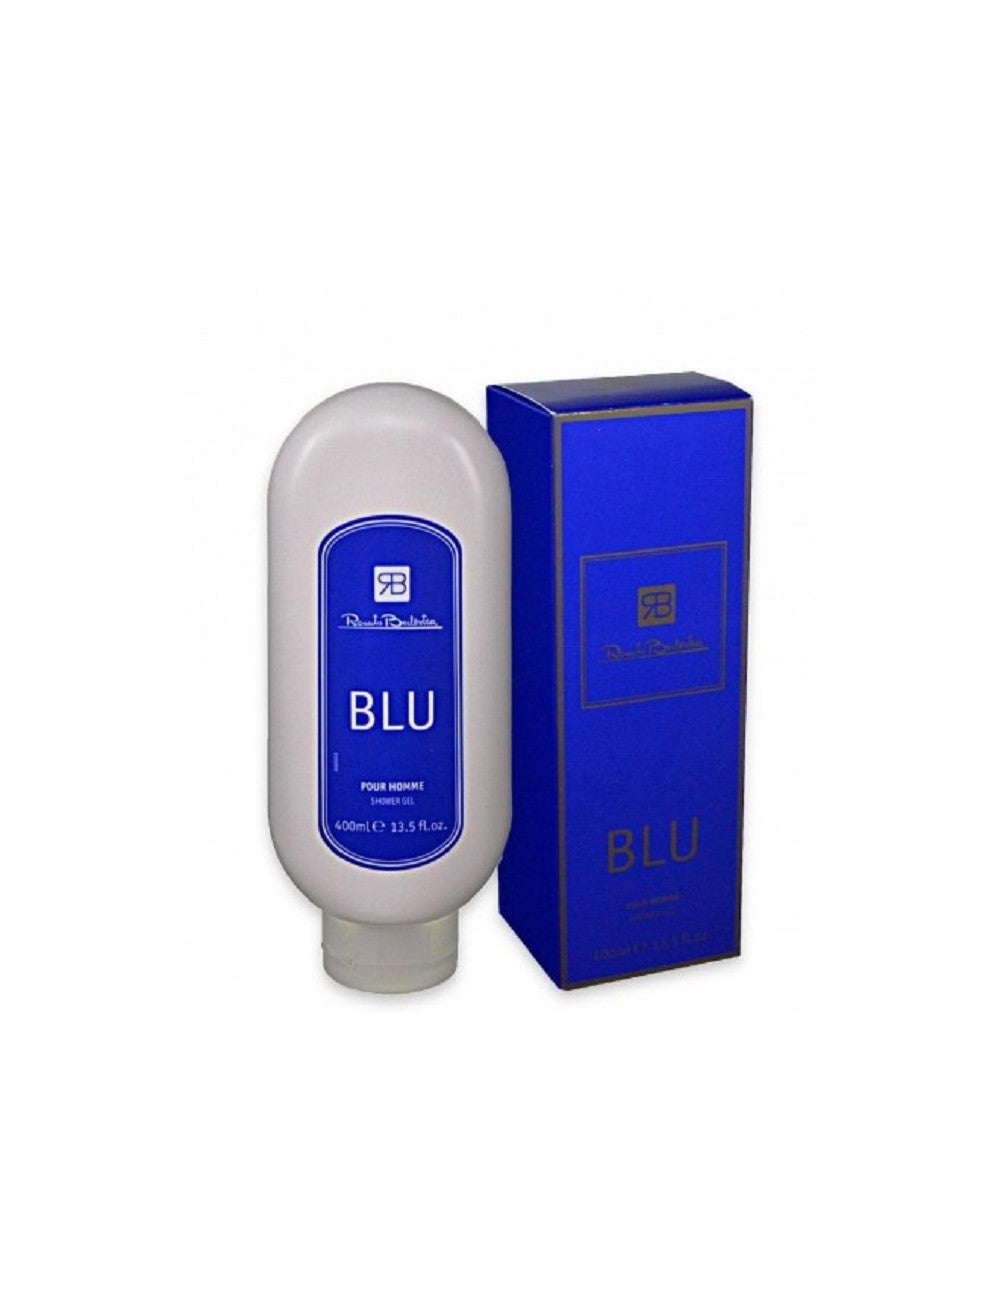 Balestra Blu Pour Homme Shower Gel 400 ml - RossoLaccaStore